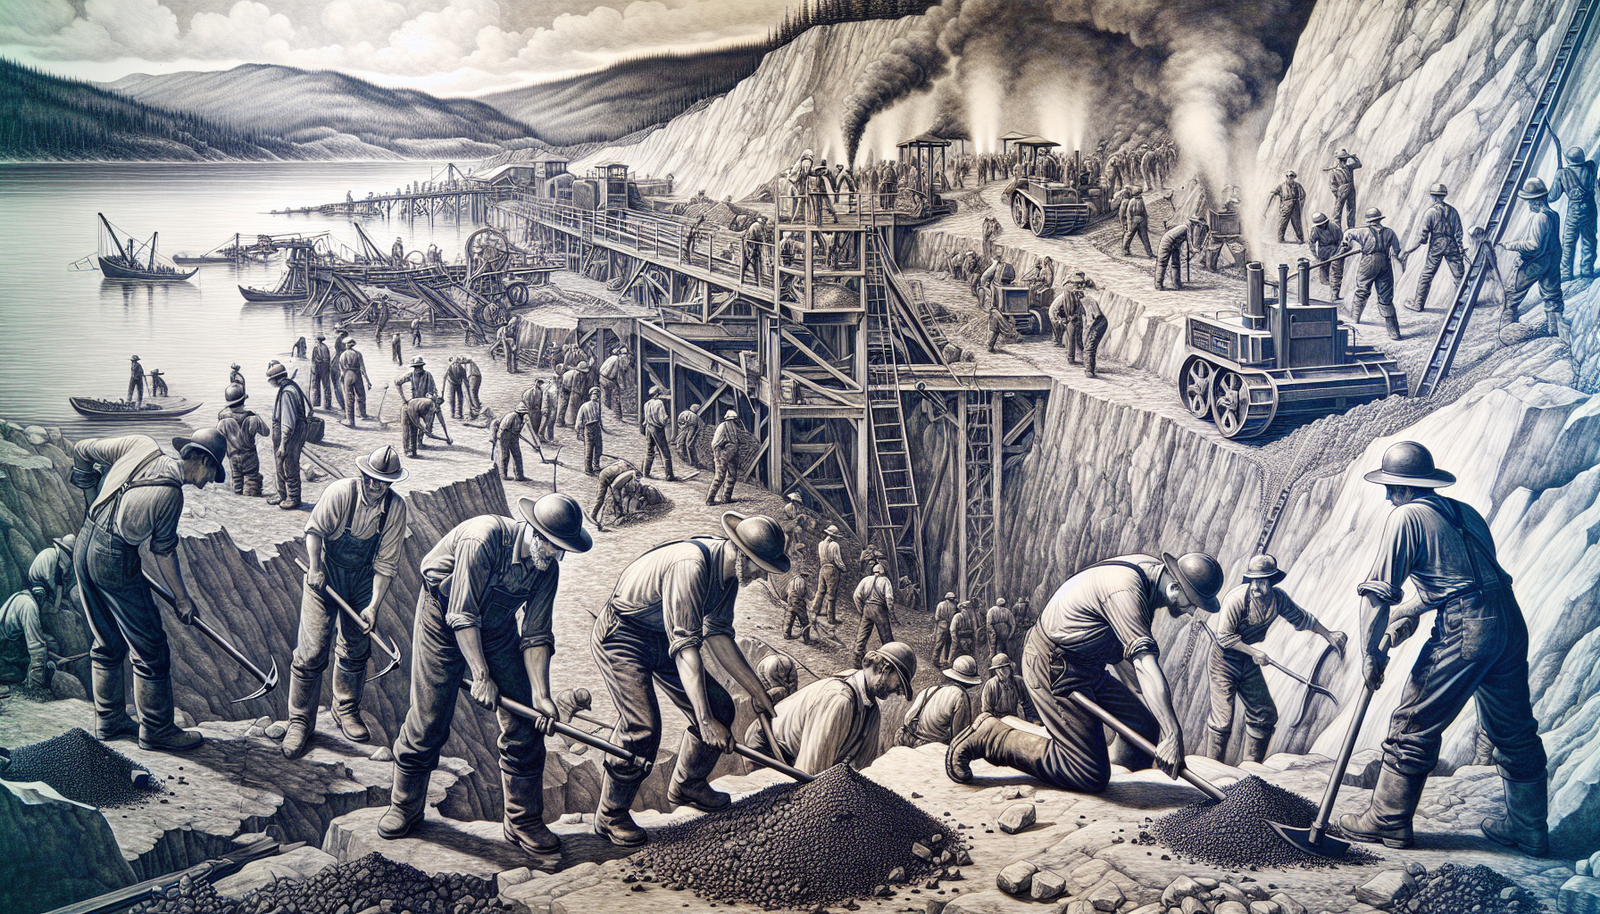 Illustration of Texada Island's mining history with miners working in a quarry